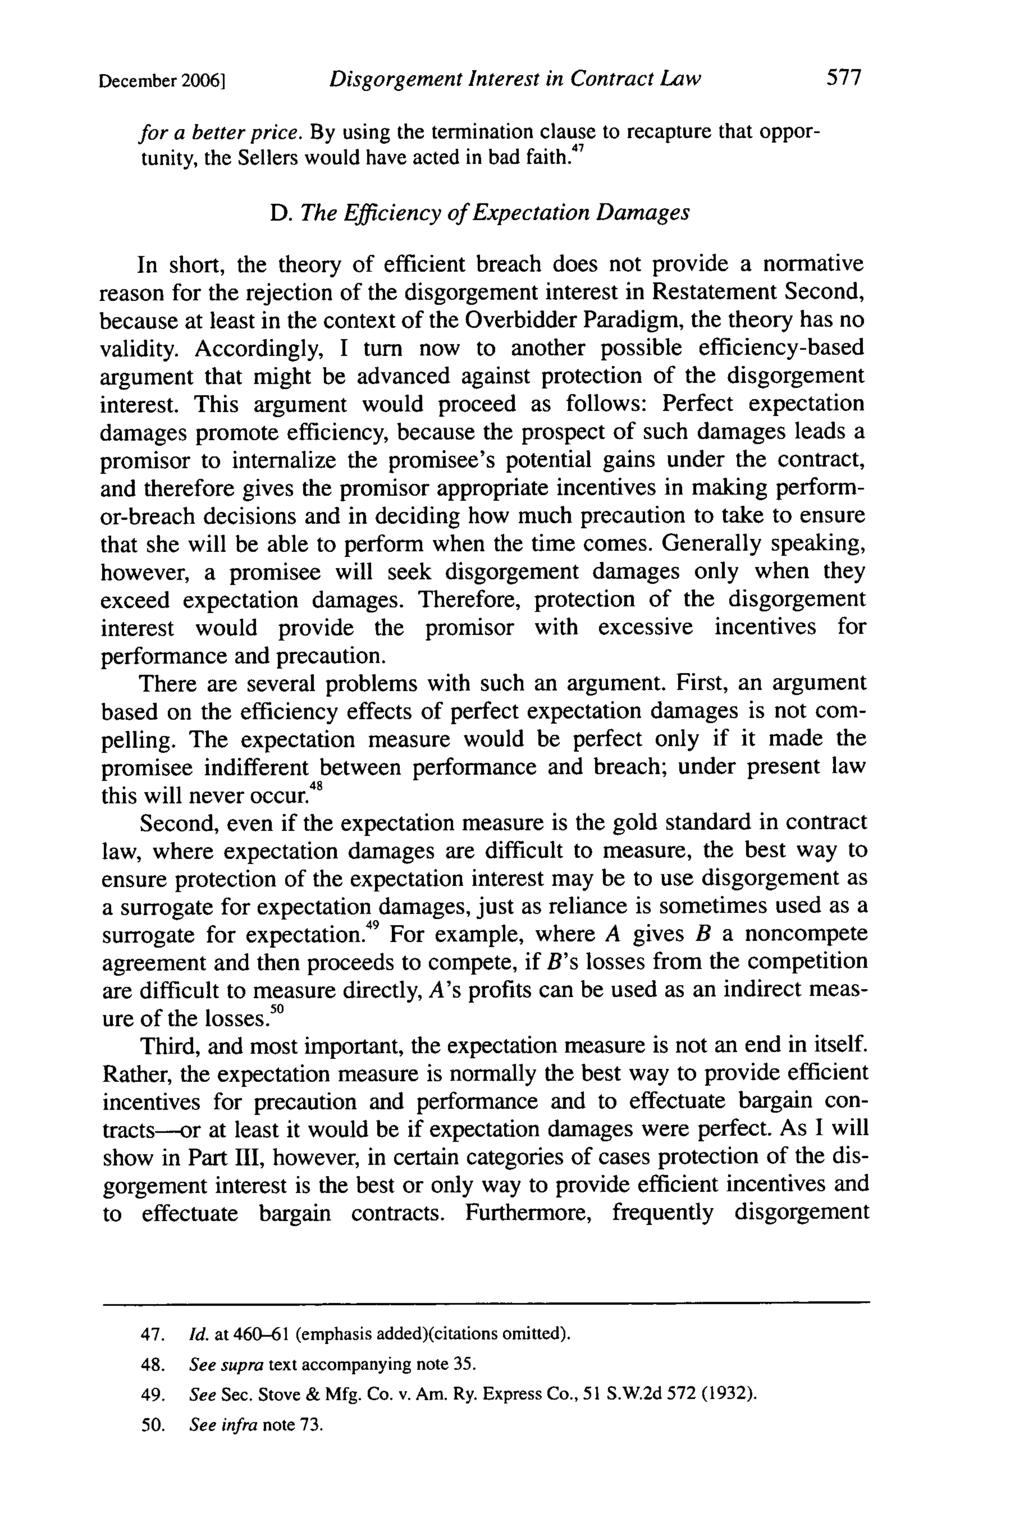 December 2006] Disgorgement Interest in Contract Law for a better price. By using the termination clause to recapture that opportunity, the Sellers would have acted in bad faith. 47 D.